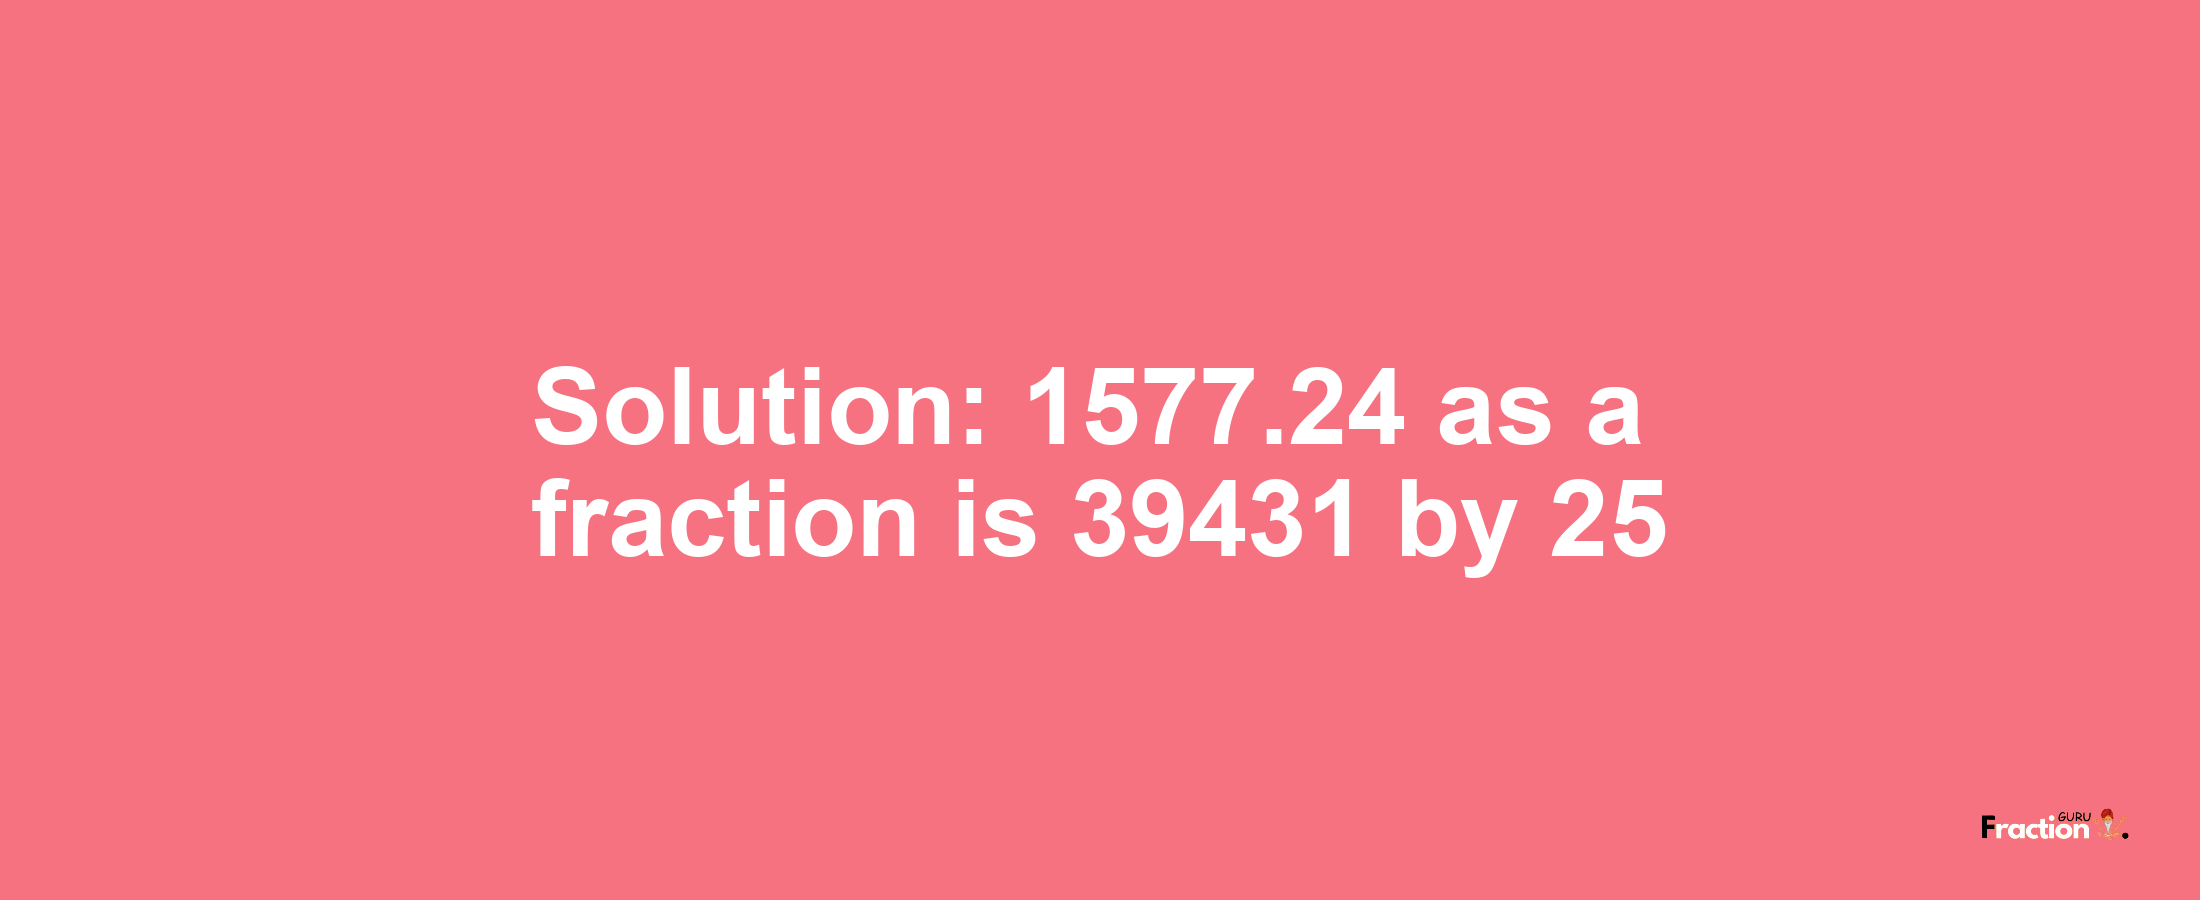 Solution:1577.24 as a fraction is 39431/25